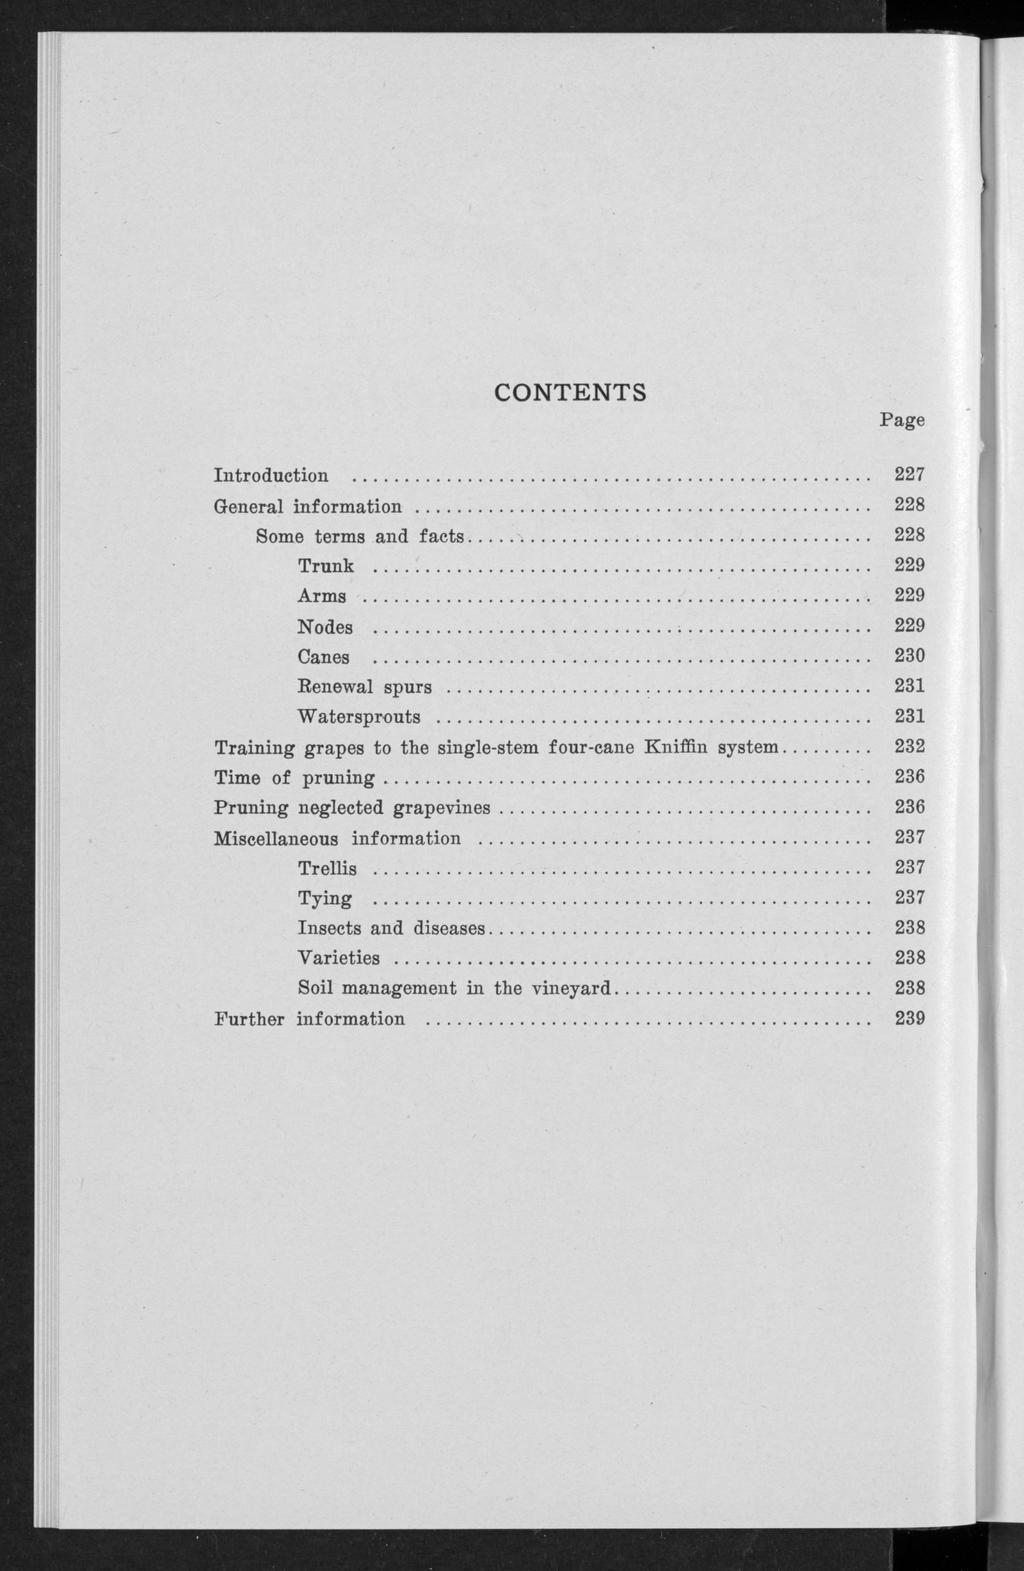 Bulletin P, Vol. 1, No. 7 [1941], Art. 1 CONTENTS Page Introduction....... 227 General information......... 228 Some terms and facts... %... /... 228 Trunk 1... 229 Arms... 229 Nodes...;... 229 Canes.